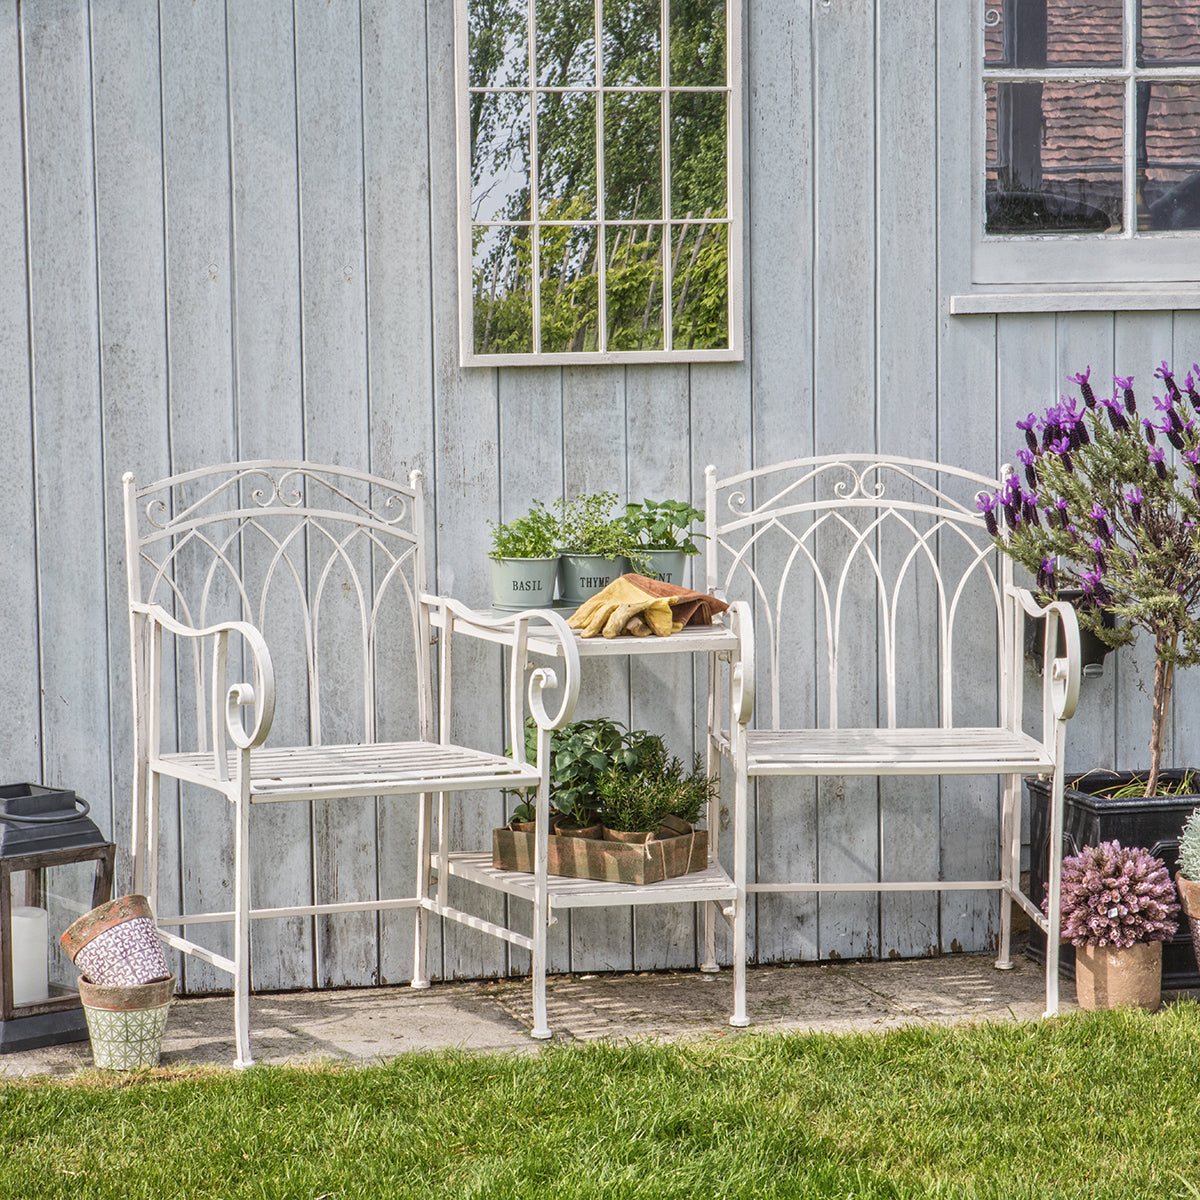 A Holne Outdoor Loveseat Gatehouse from Kikiathome.co.uk used for interior decor.